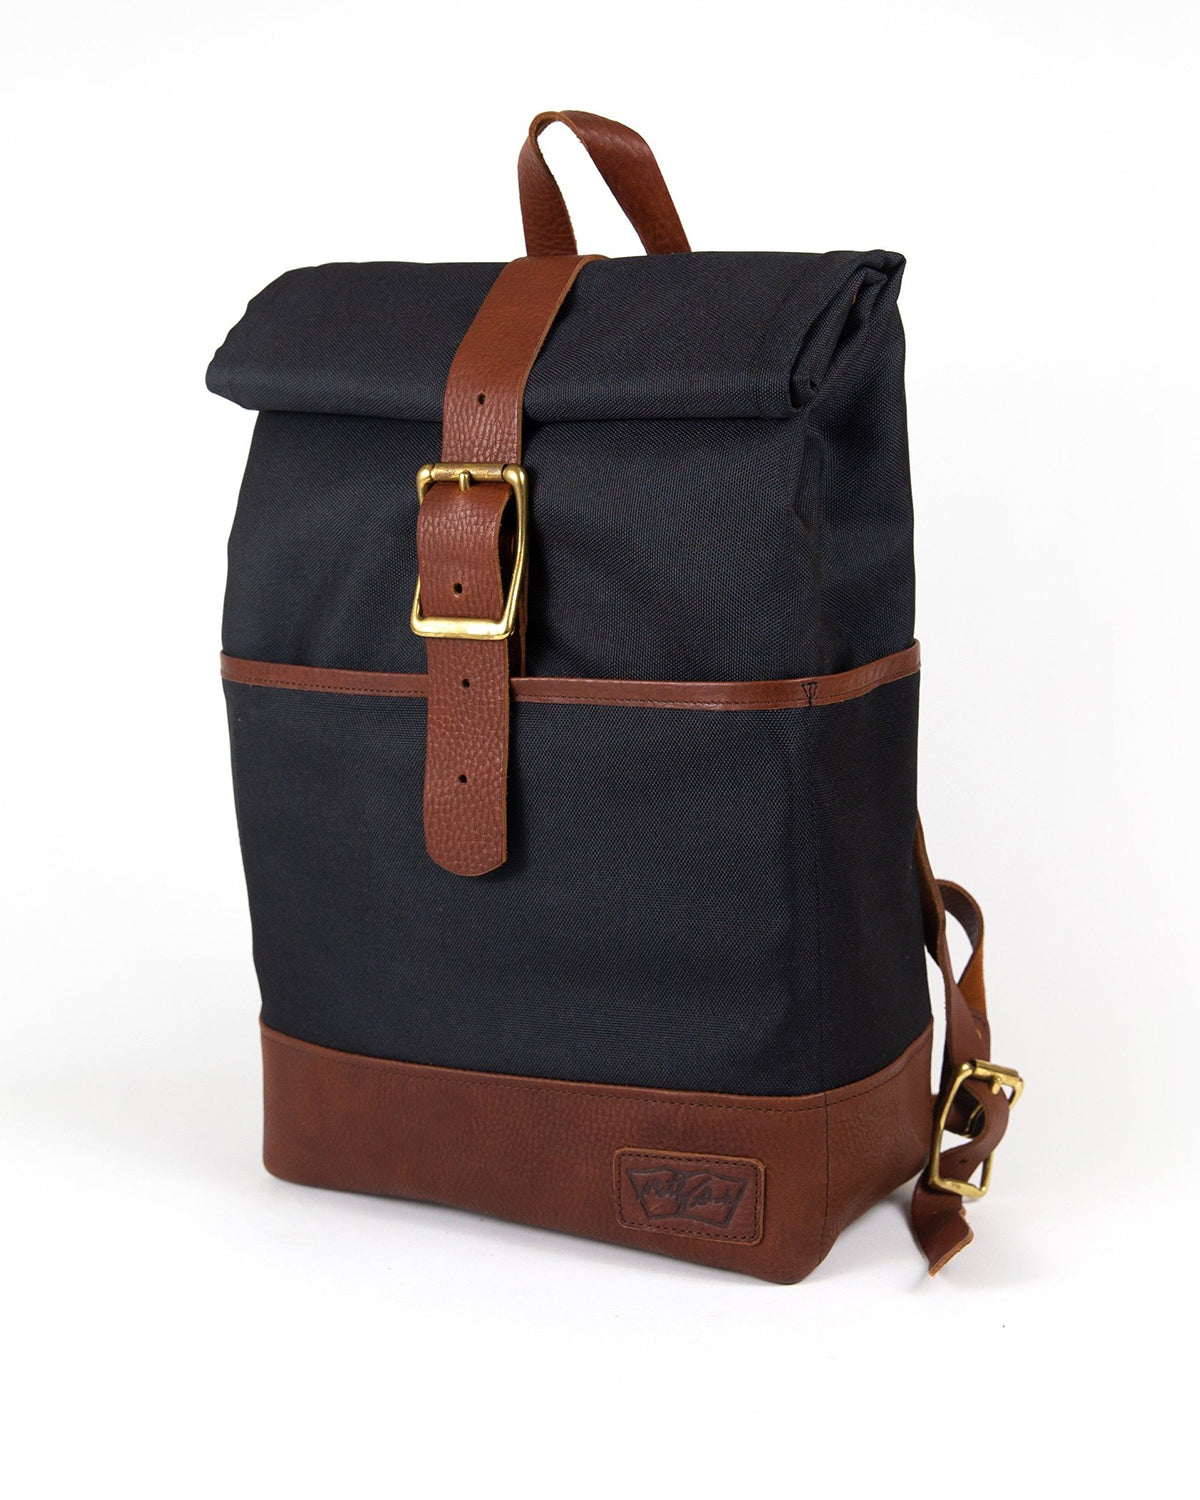 Daypack in Black with Brown Leather - Motley Goods